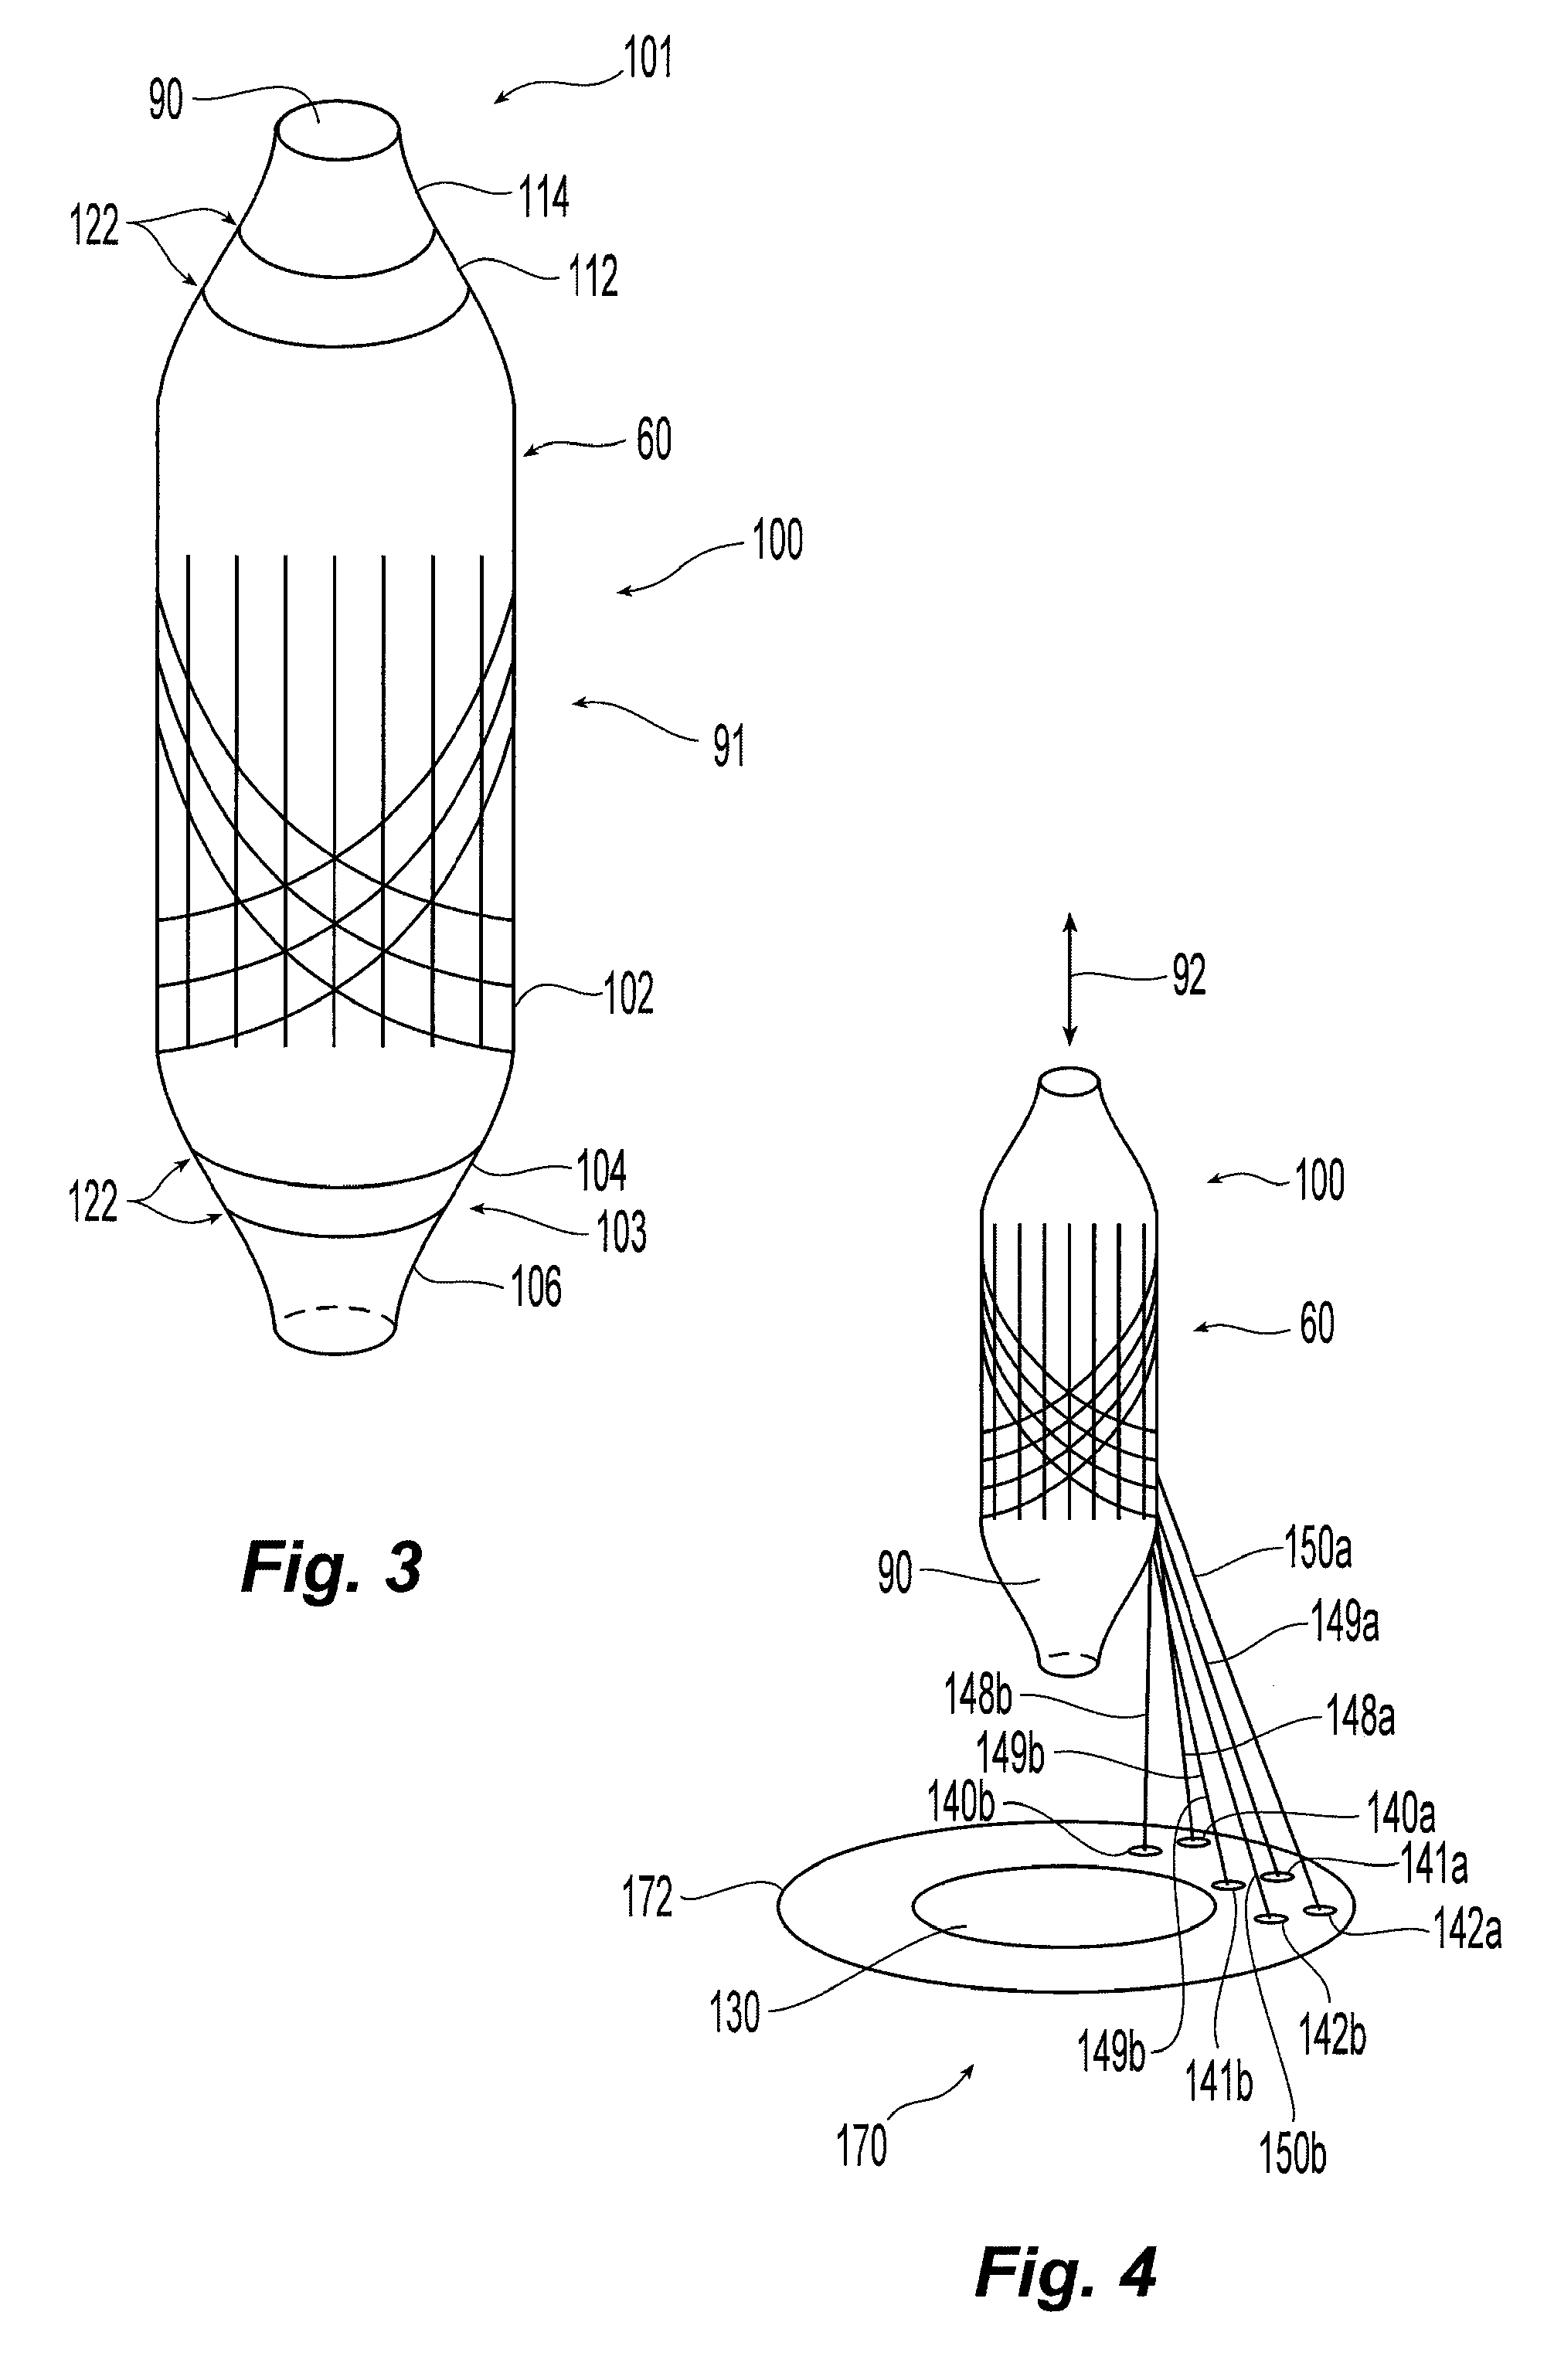 Balloon with dividing fabric layers and method for braiding over three-dimensional forms